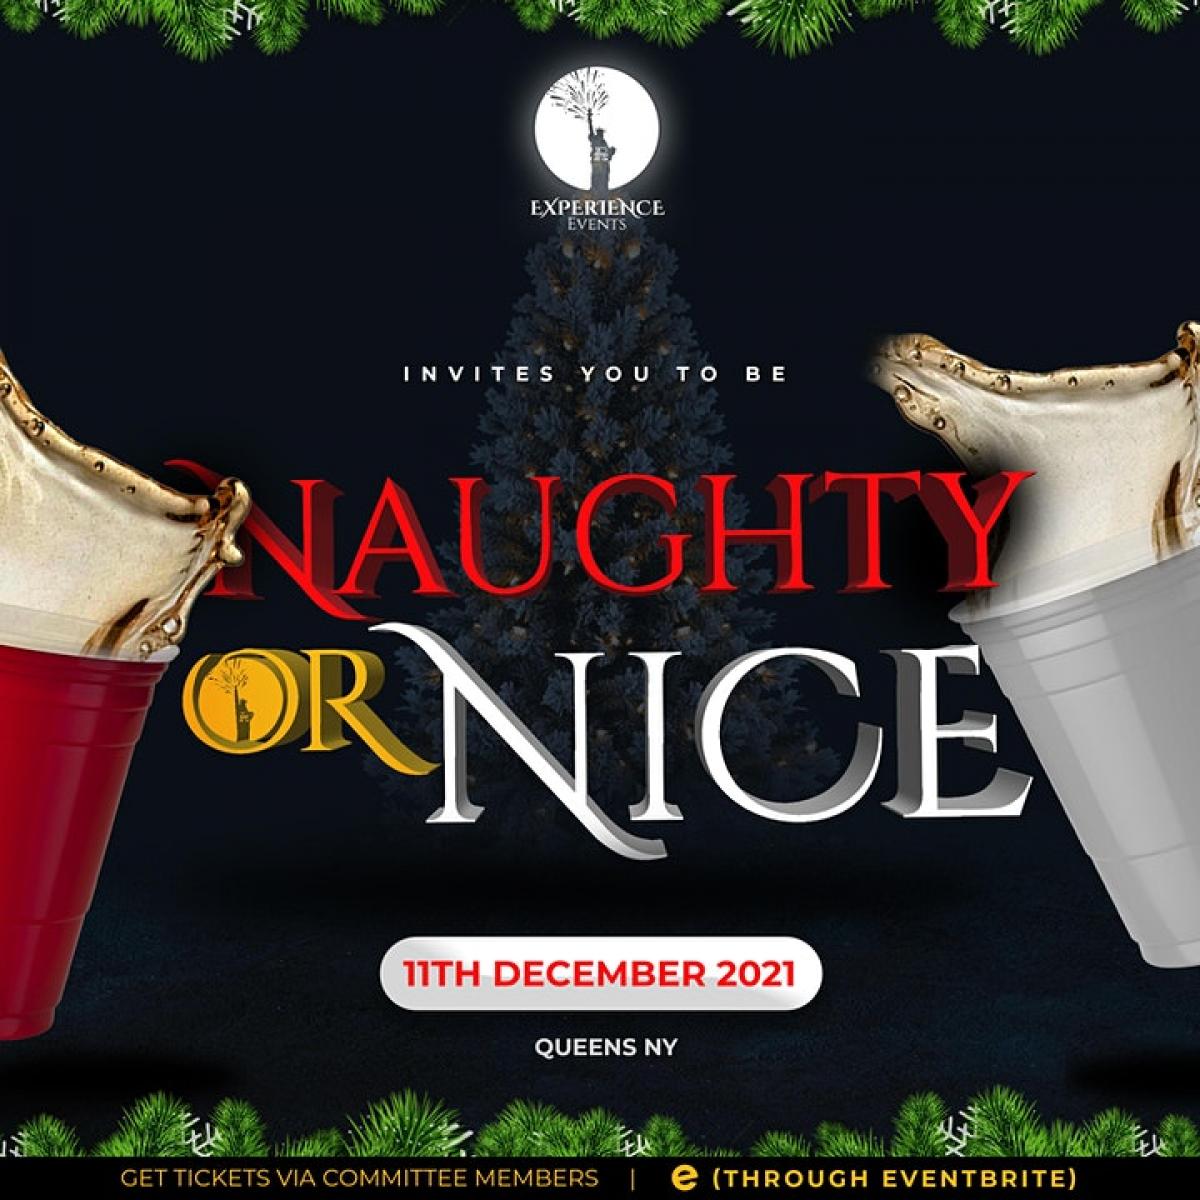 Naughty or Nice flyer or graphic.